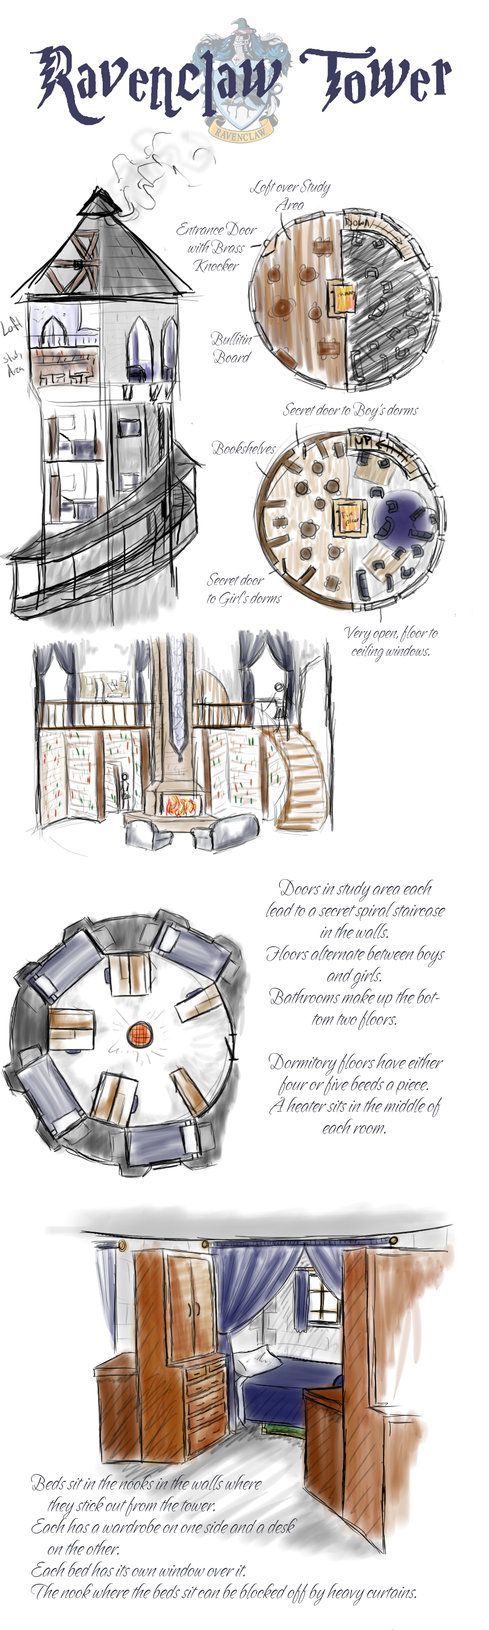 Ravenclaw House common room sketch.